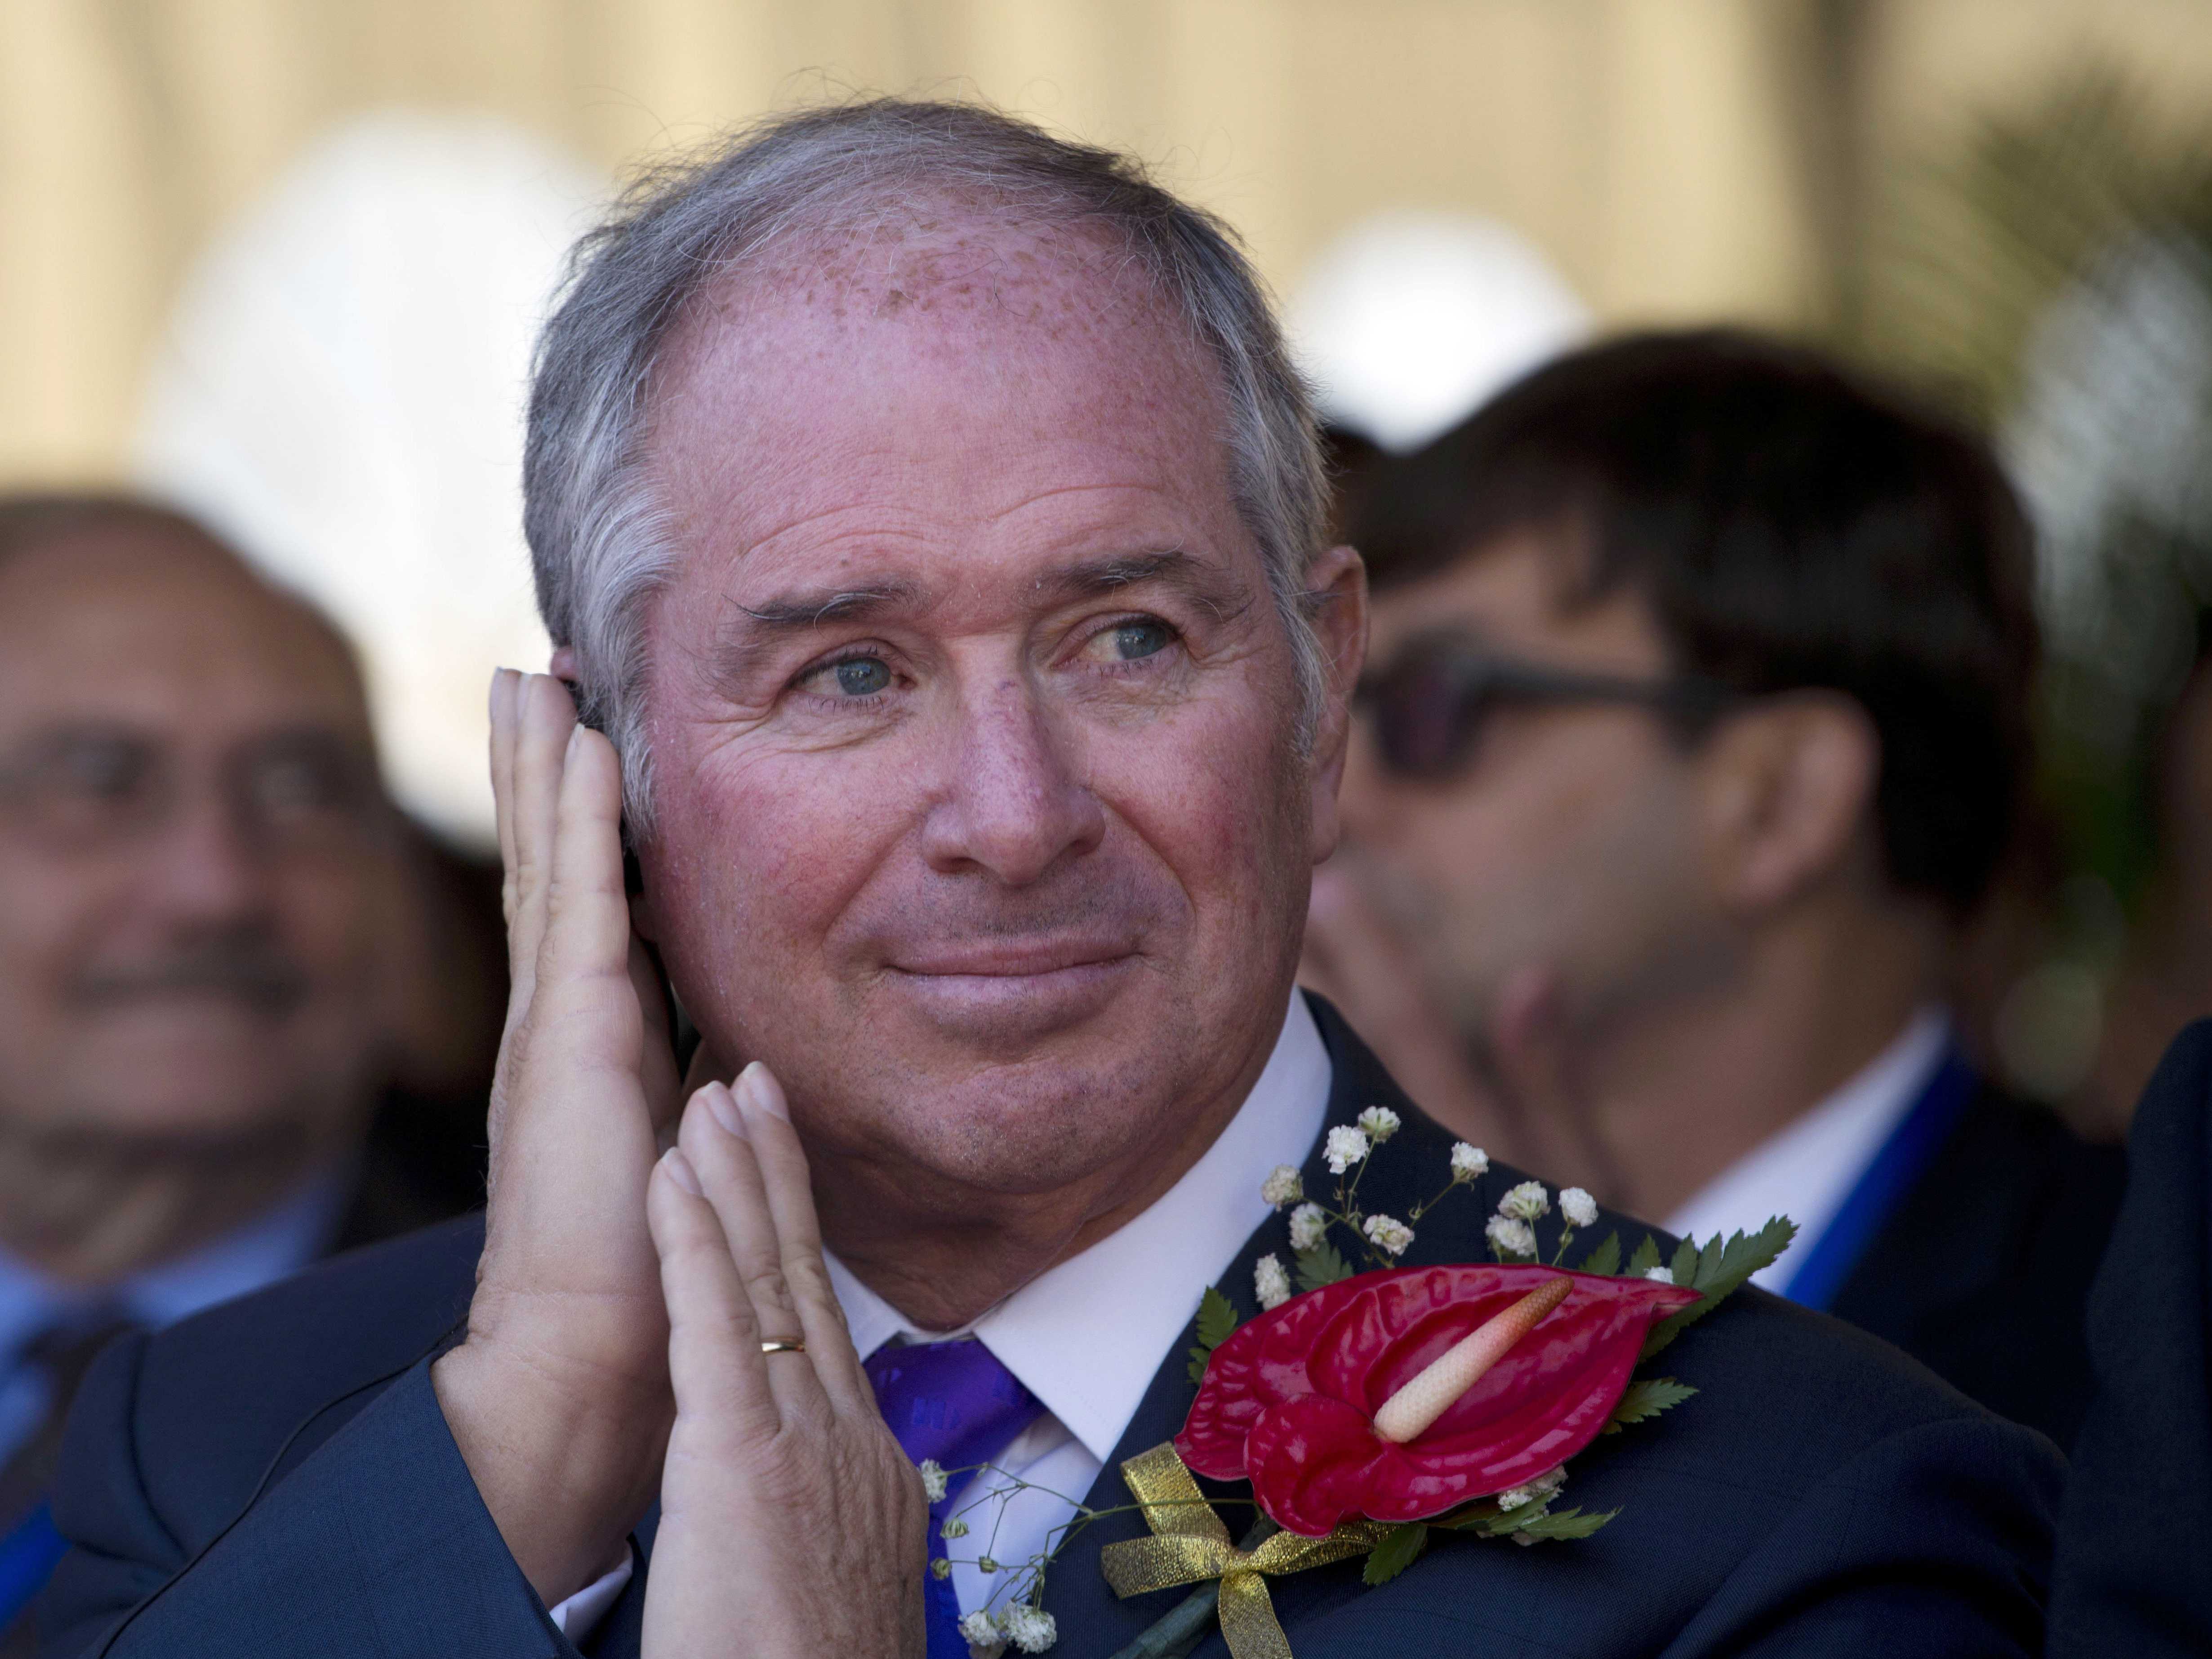 The richest CEO in private equity just wants to hire nice people